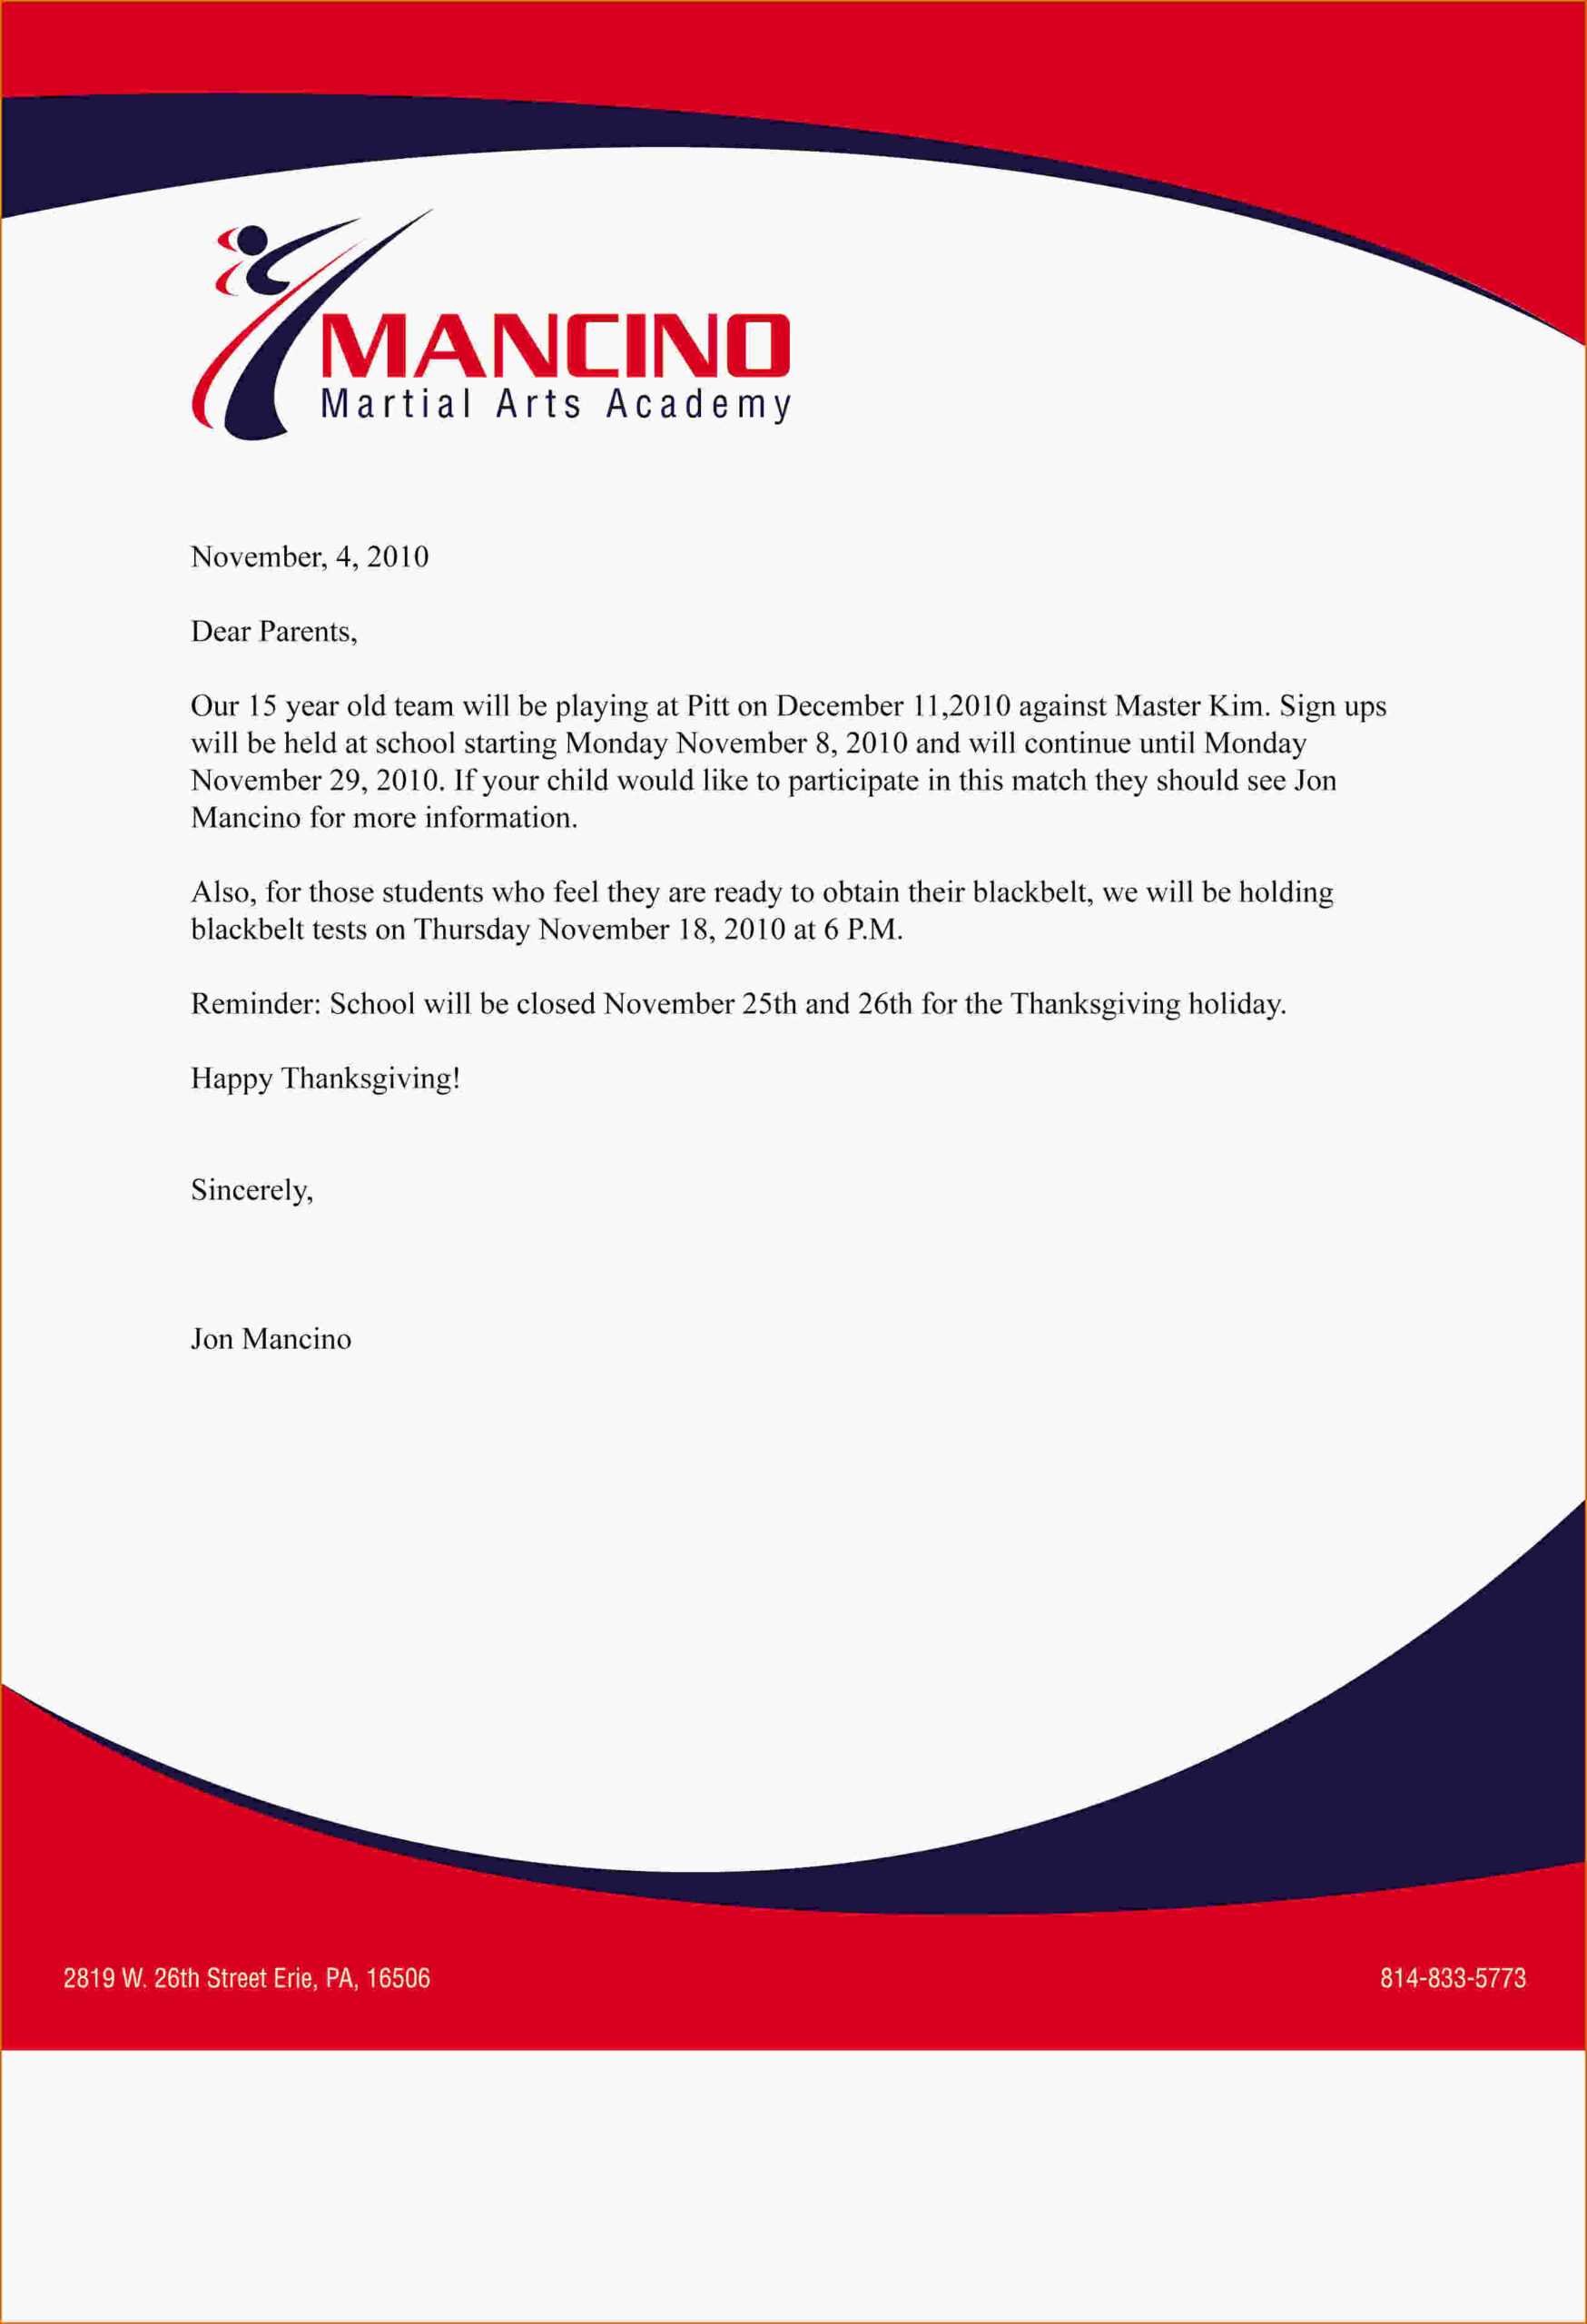 Business Letter Template With Letterhead.9 Basic Letterhead With Regard To Headed Letter Template Word